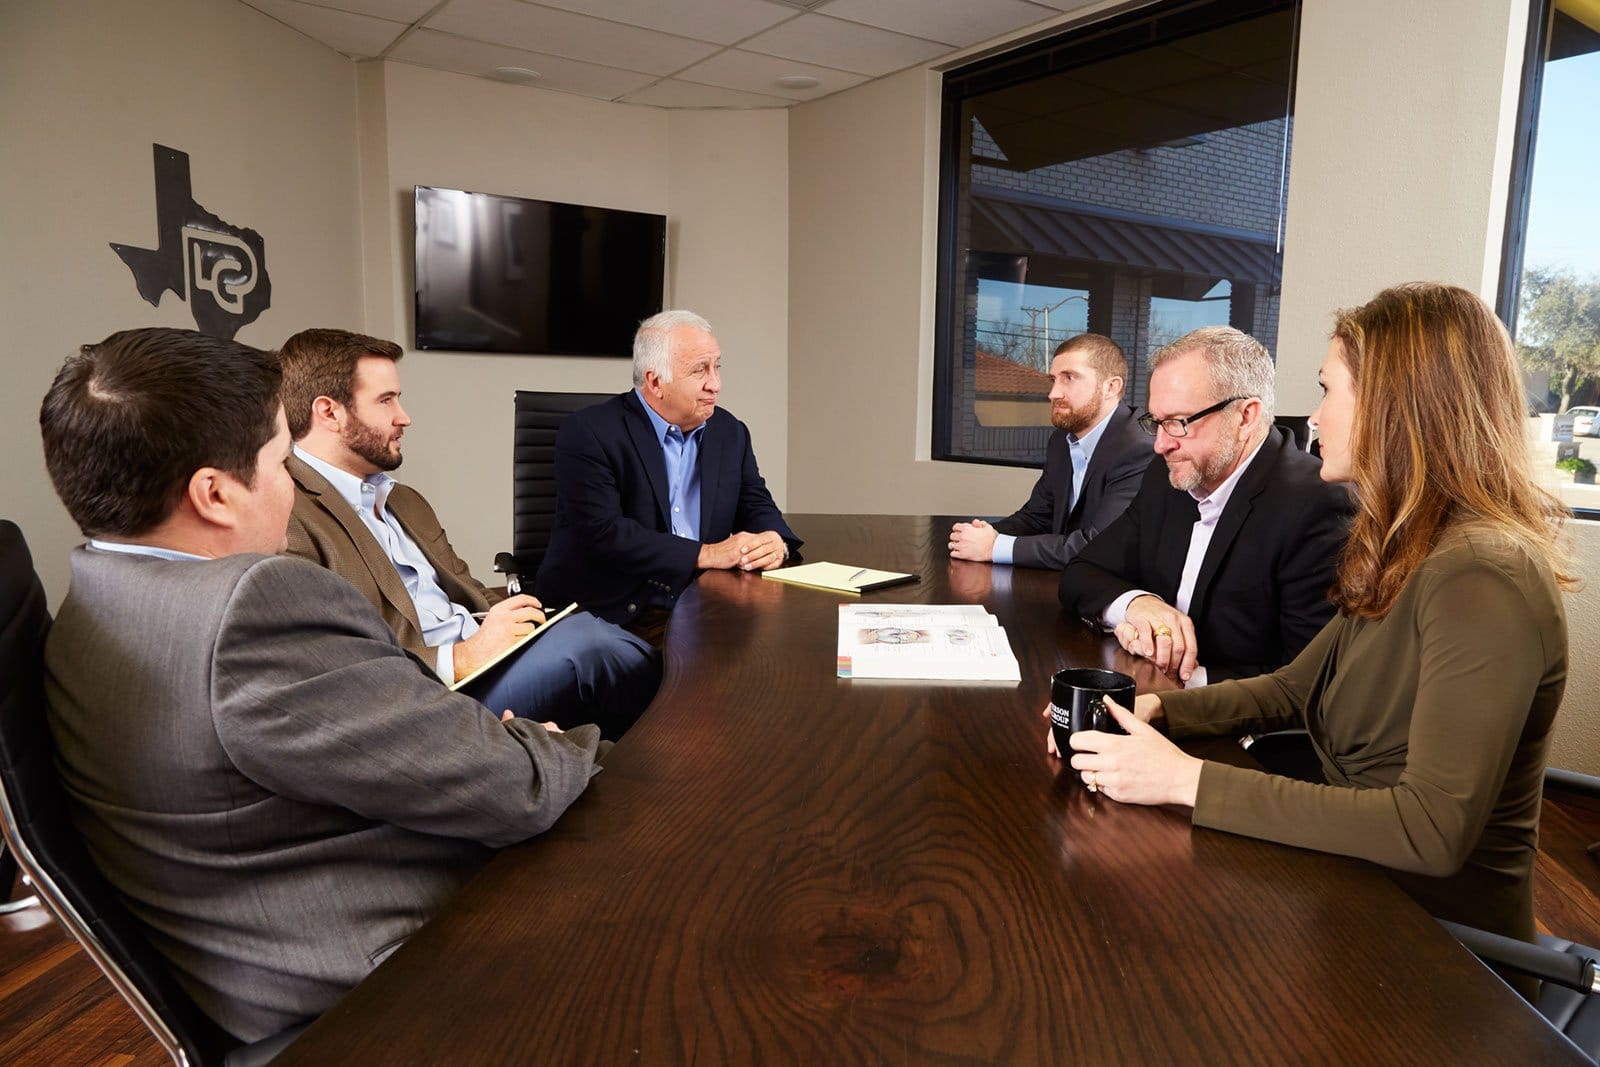 Travis patterson and the other attorneys having a meeting